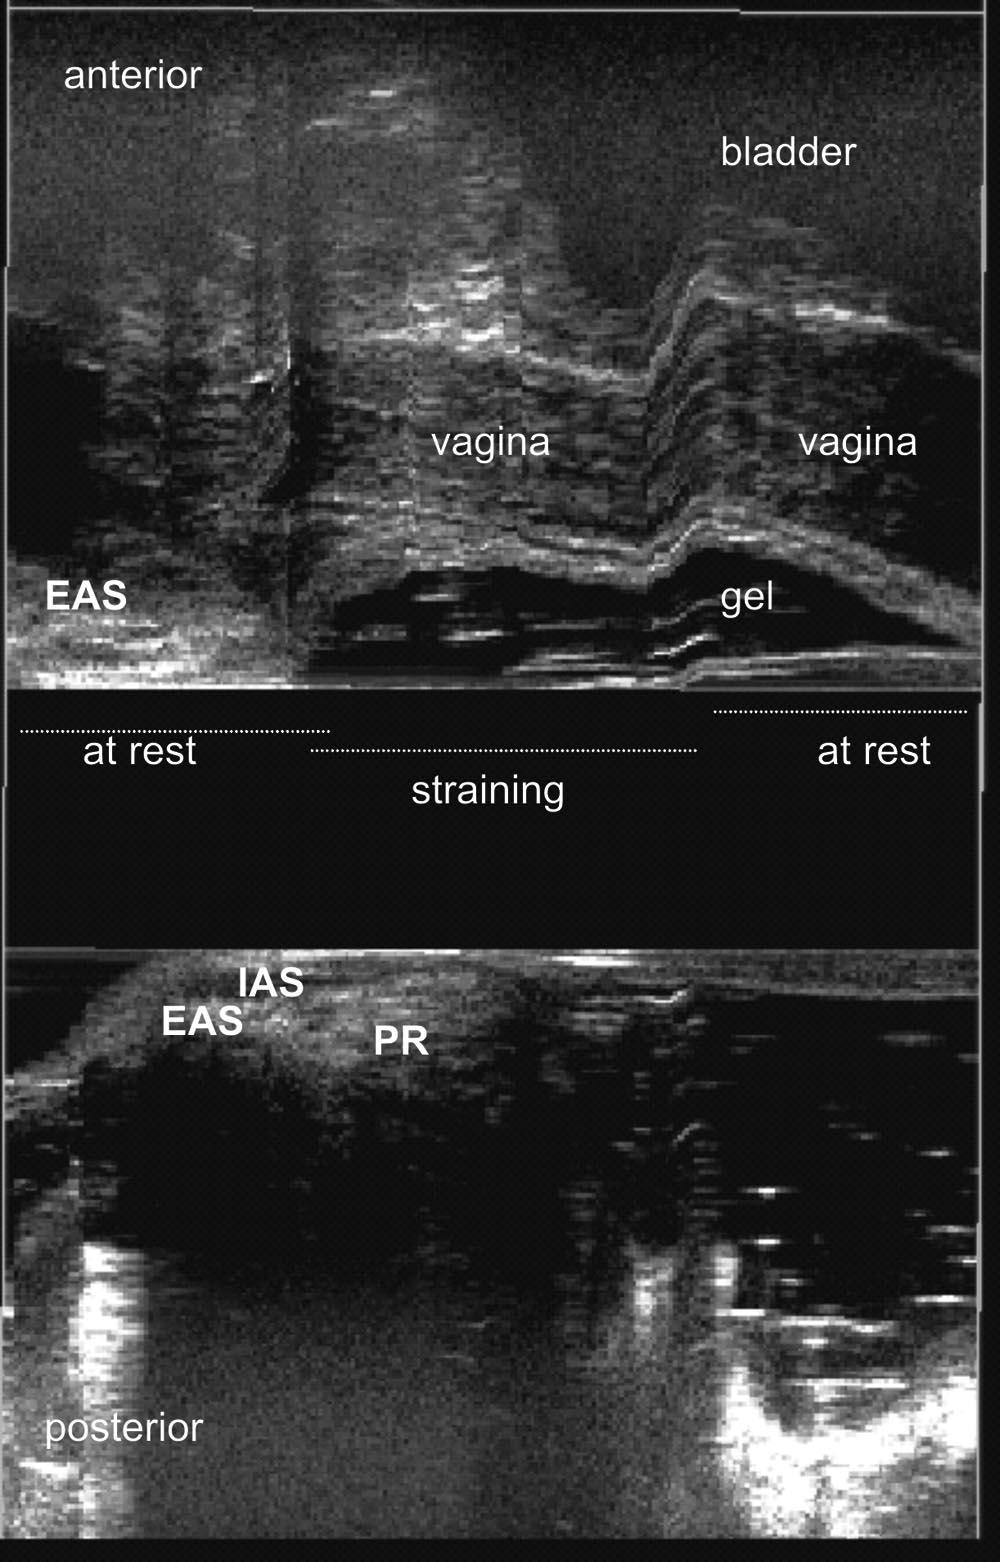 DISEASES OF THE COLON &RECTUM VOLUME 54: 6 (2011) 689 FIGURE 2. Scan 3 with gel inserted into the rectum (sagittal plane). Normal examination. Vagina is pushed downwards and backwards.